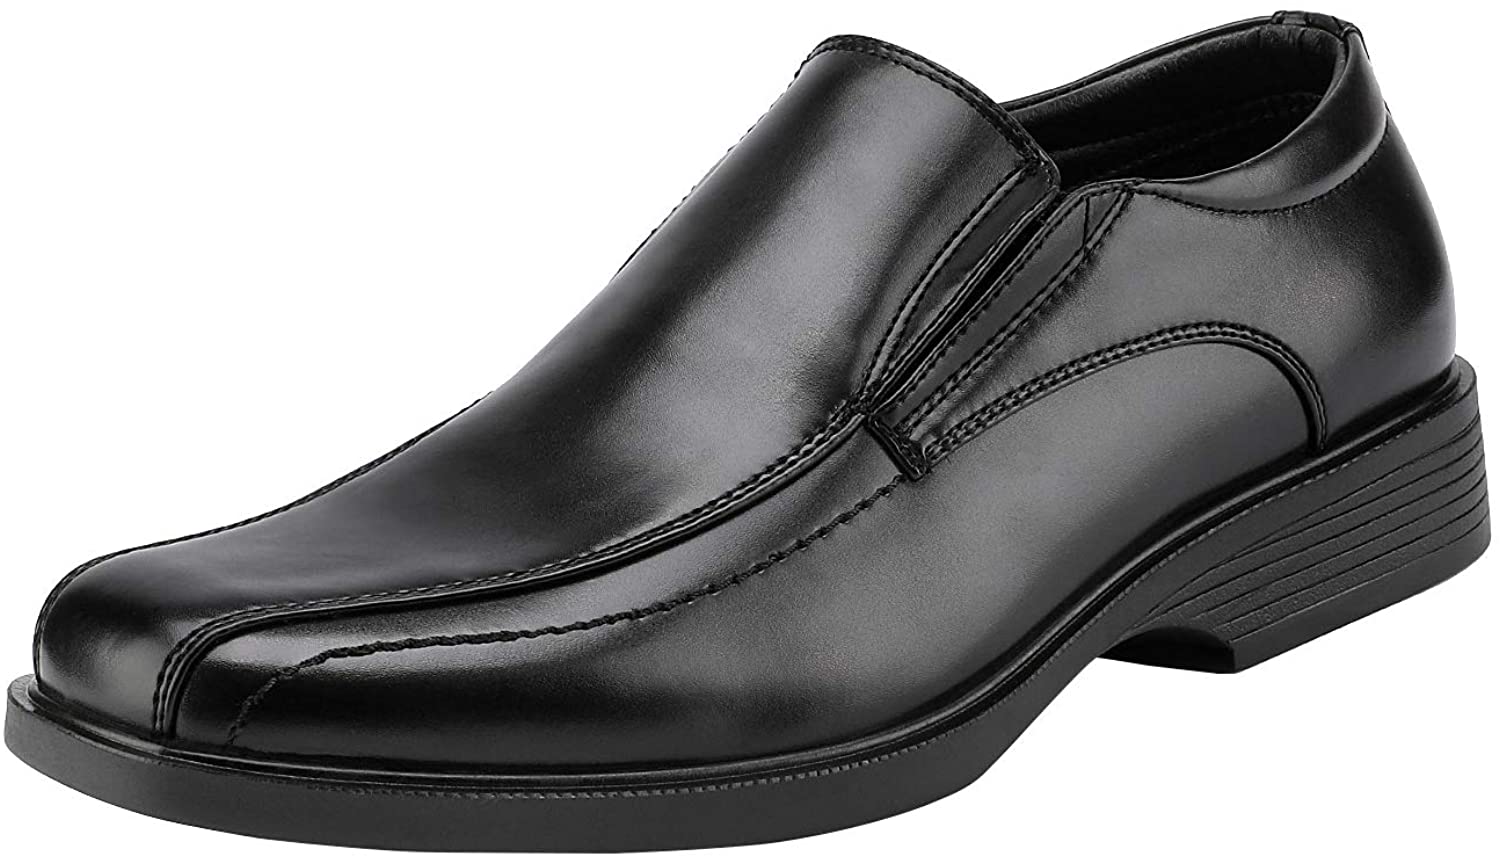 Bruno Marc Mens Formal Leather Lined Dress Loafers Shoes